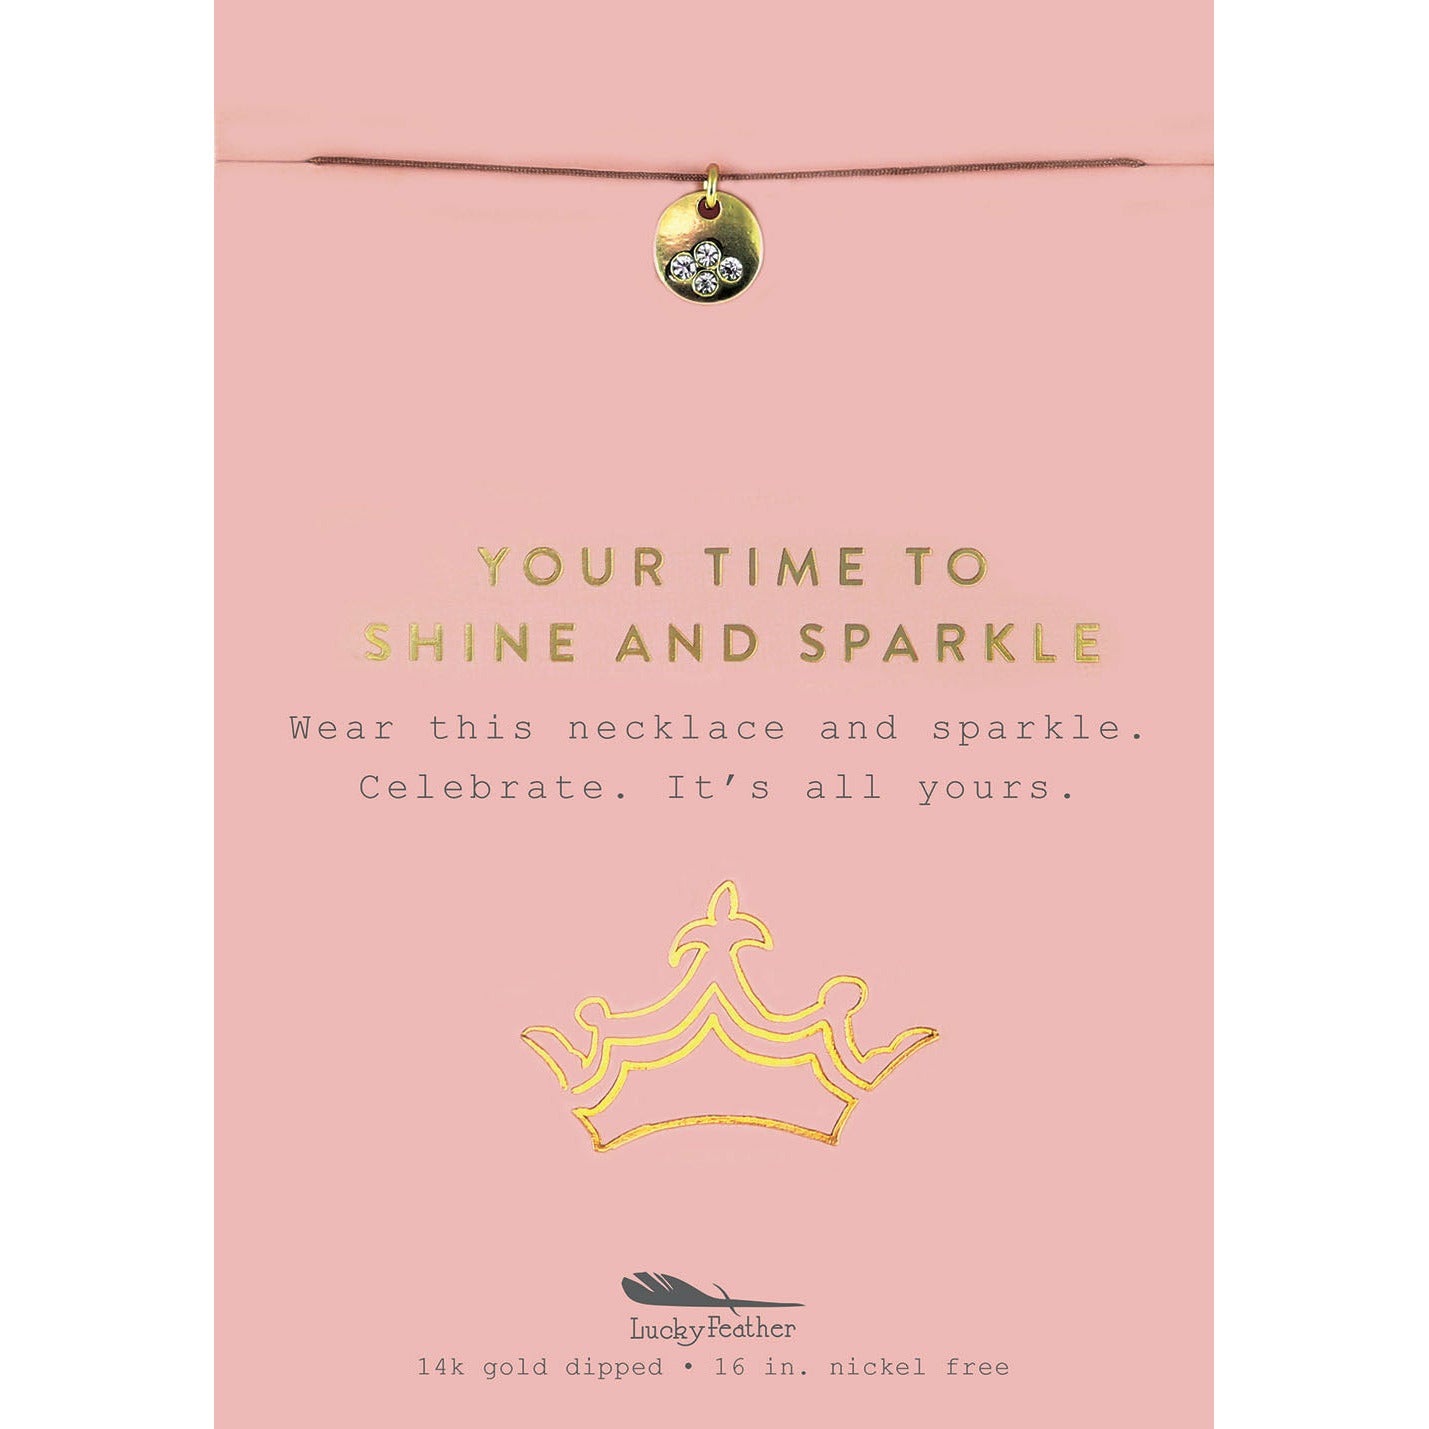 Your Time to Sparkle + Shine - Gold Sparkle Necklace